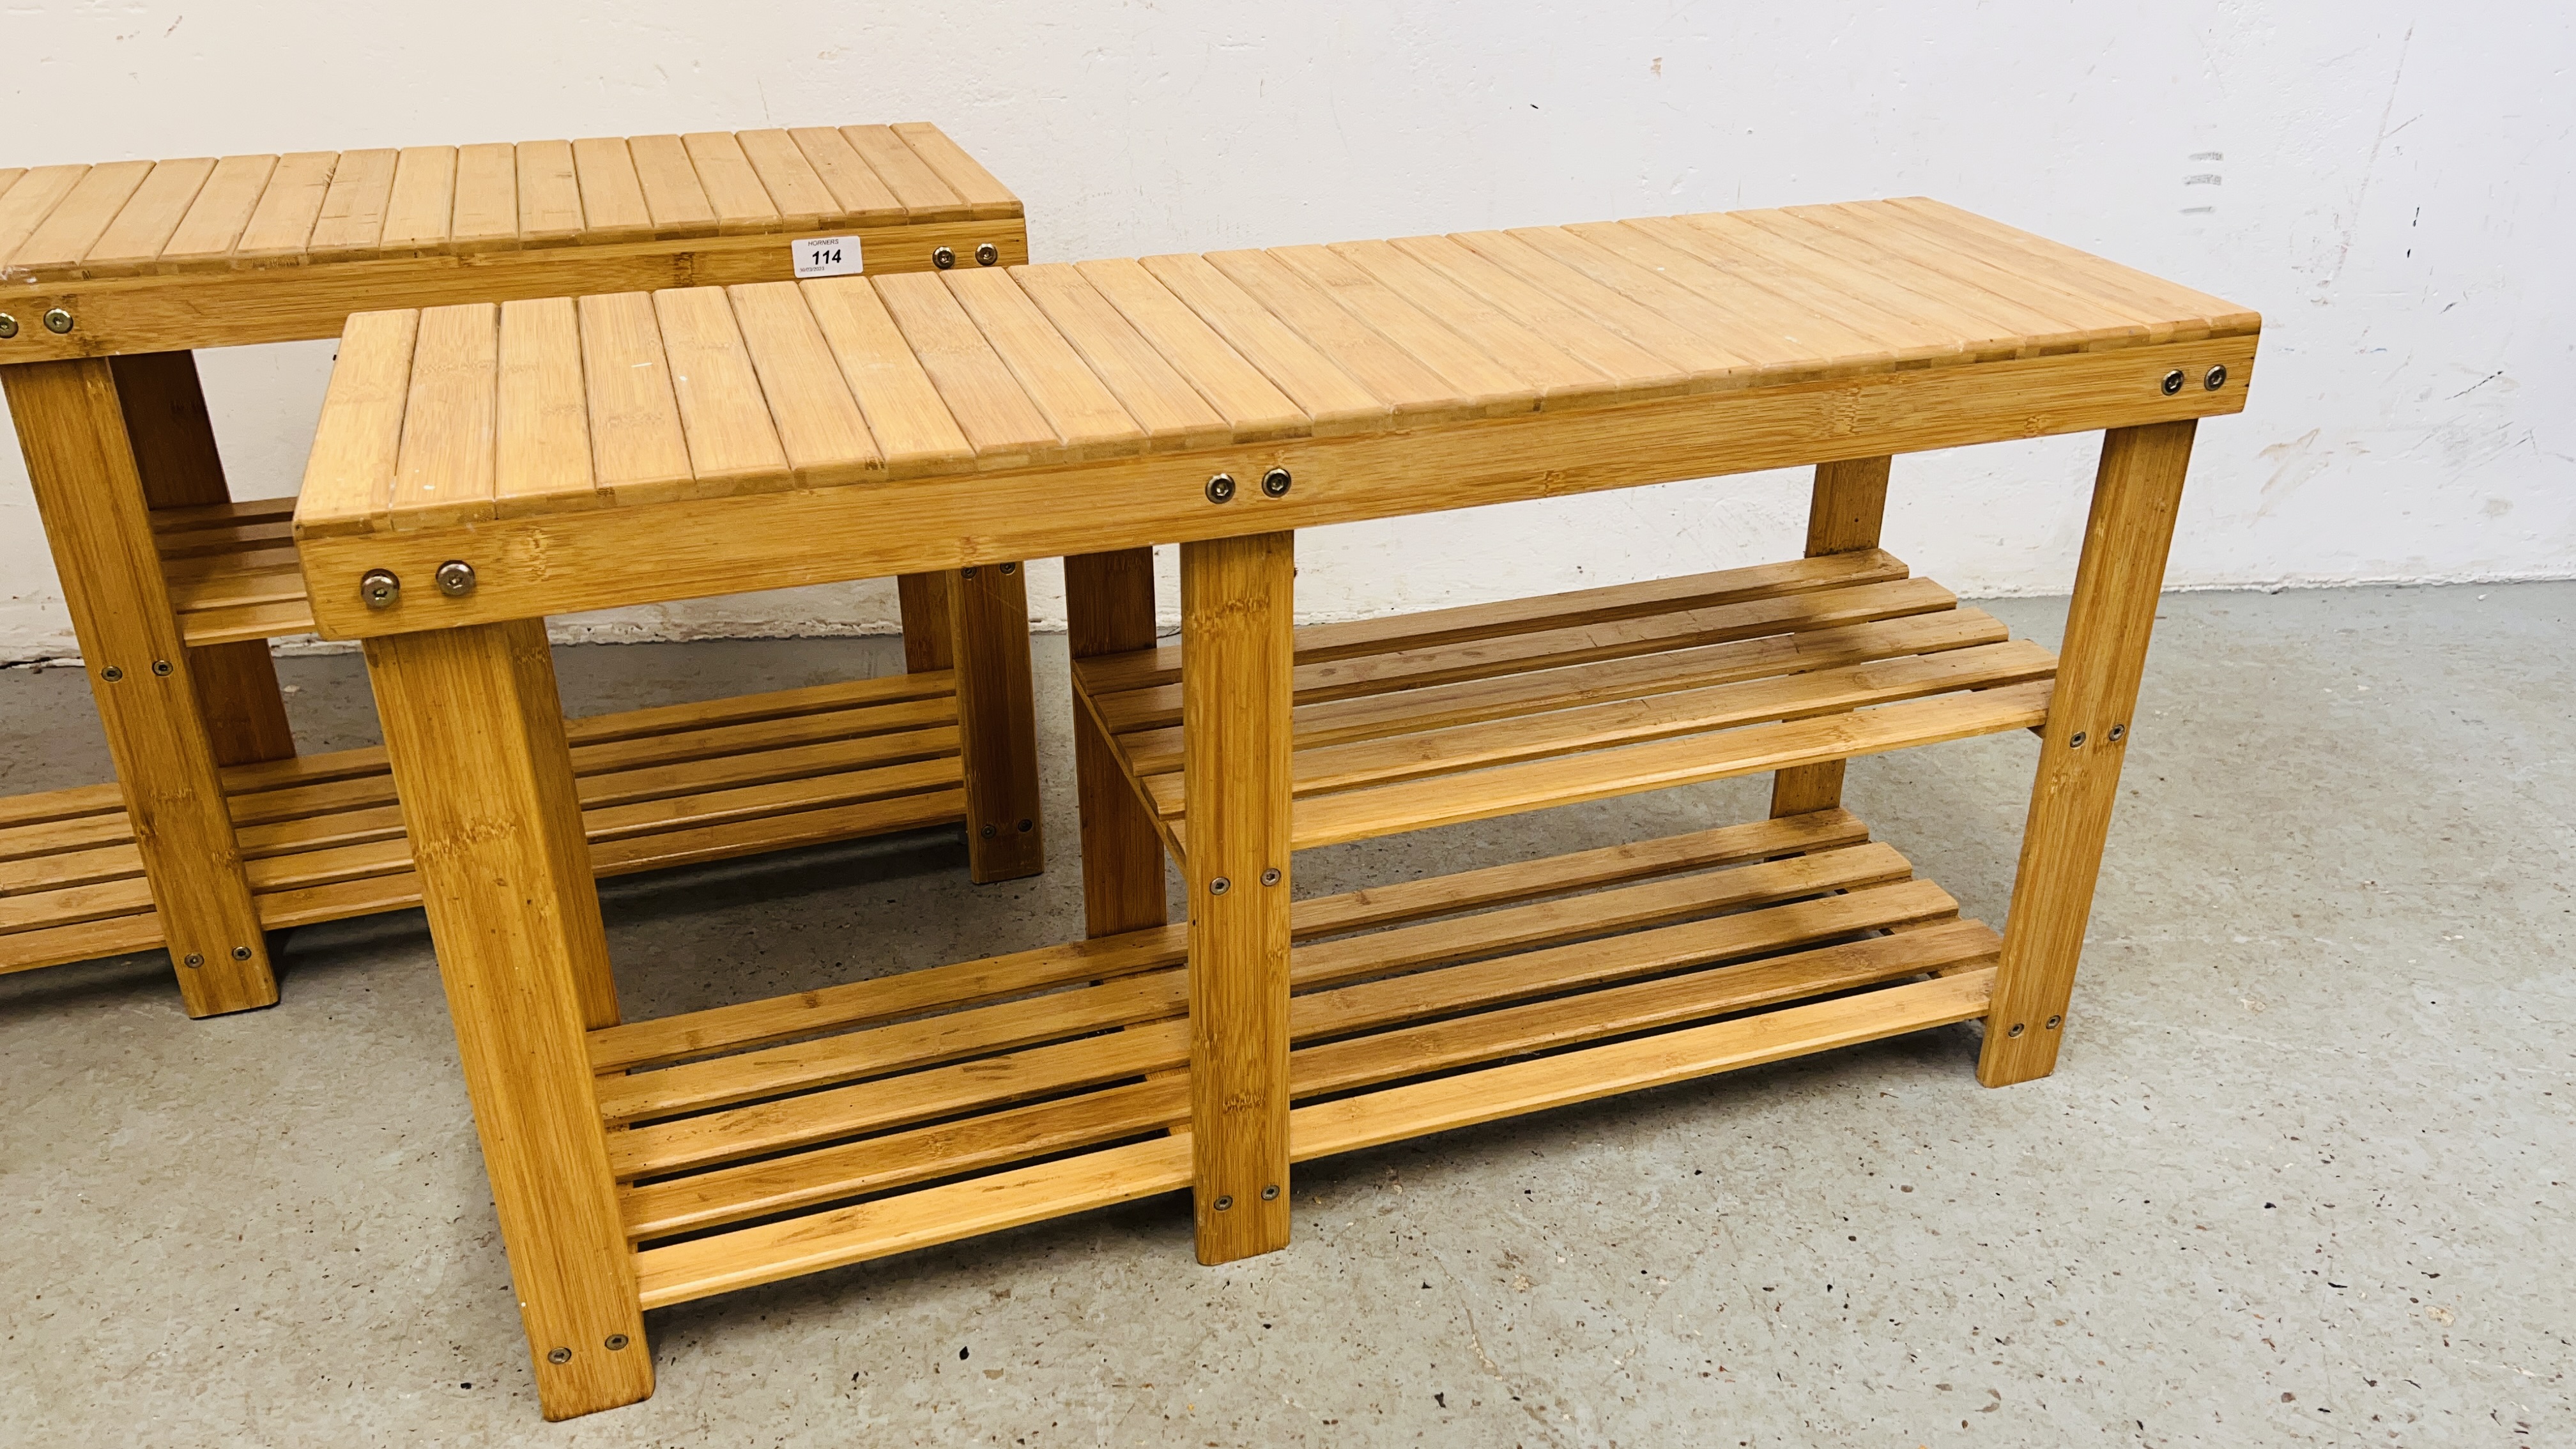 A PAIR OF BAMBOO WOOD BENCHES WITH STORAGE BELOW - LENGTH 88CM. - Image 2 of 5